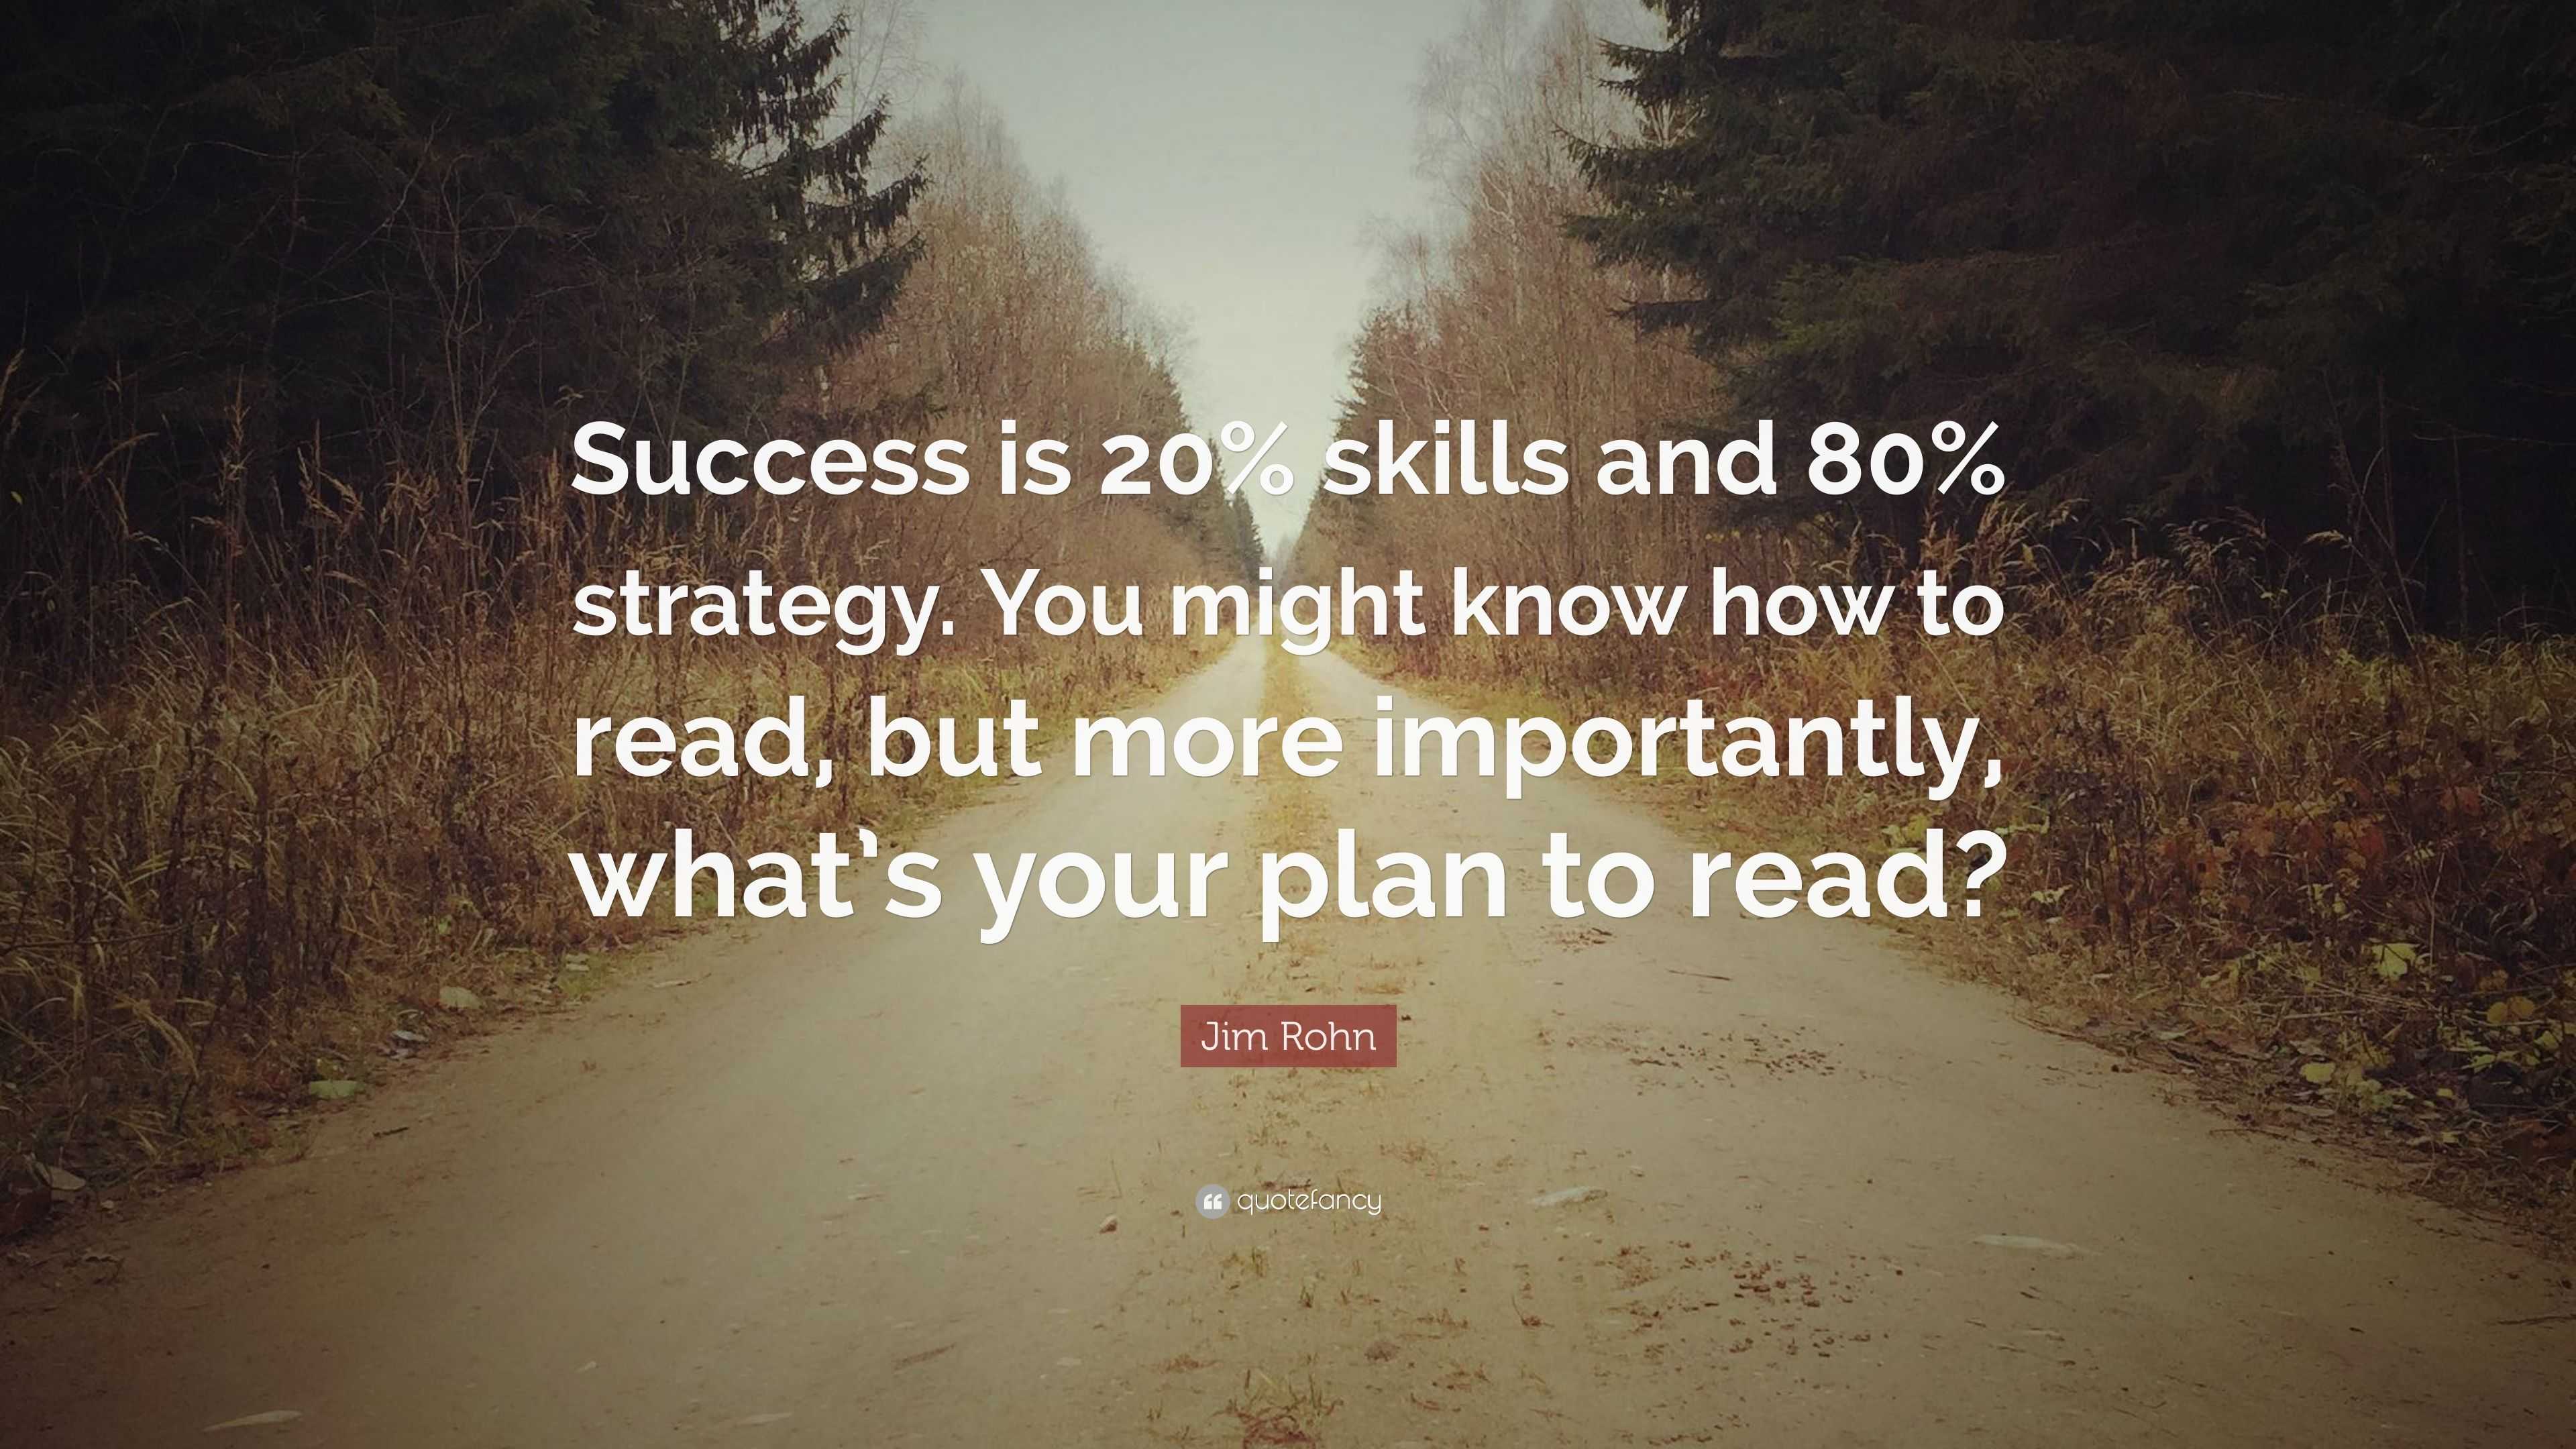 Jim Rohn Quote “Success is 20 skills and 80 strategy. You might know